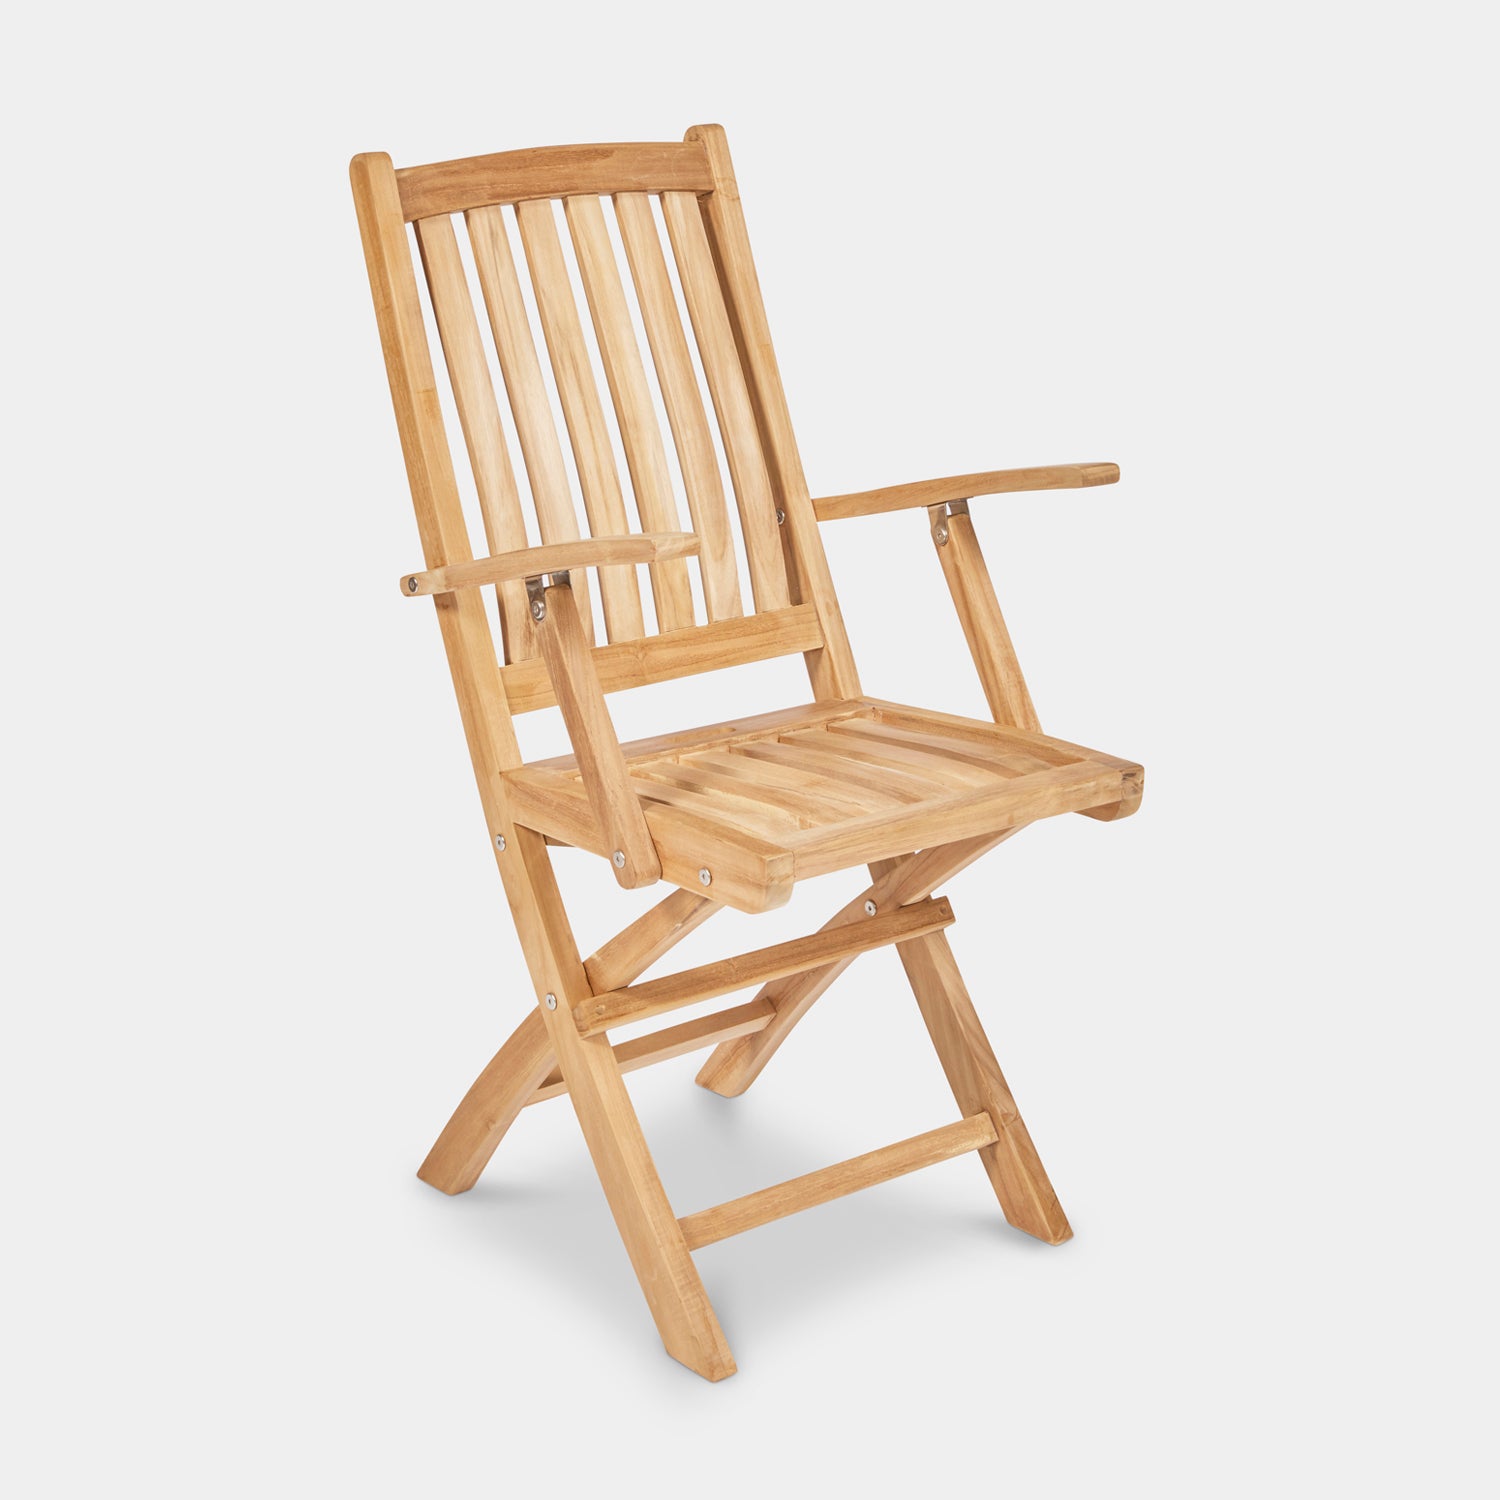 Outdoor-Teak-Dining-Chair-WithArms-Hawkesbury-r1